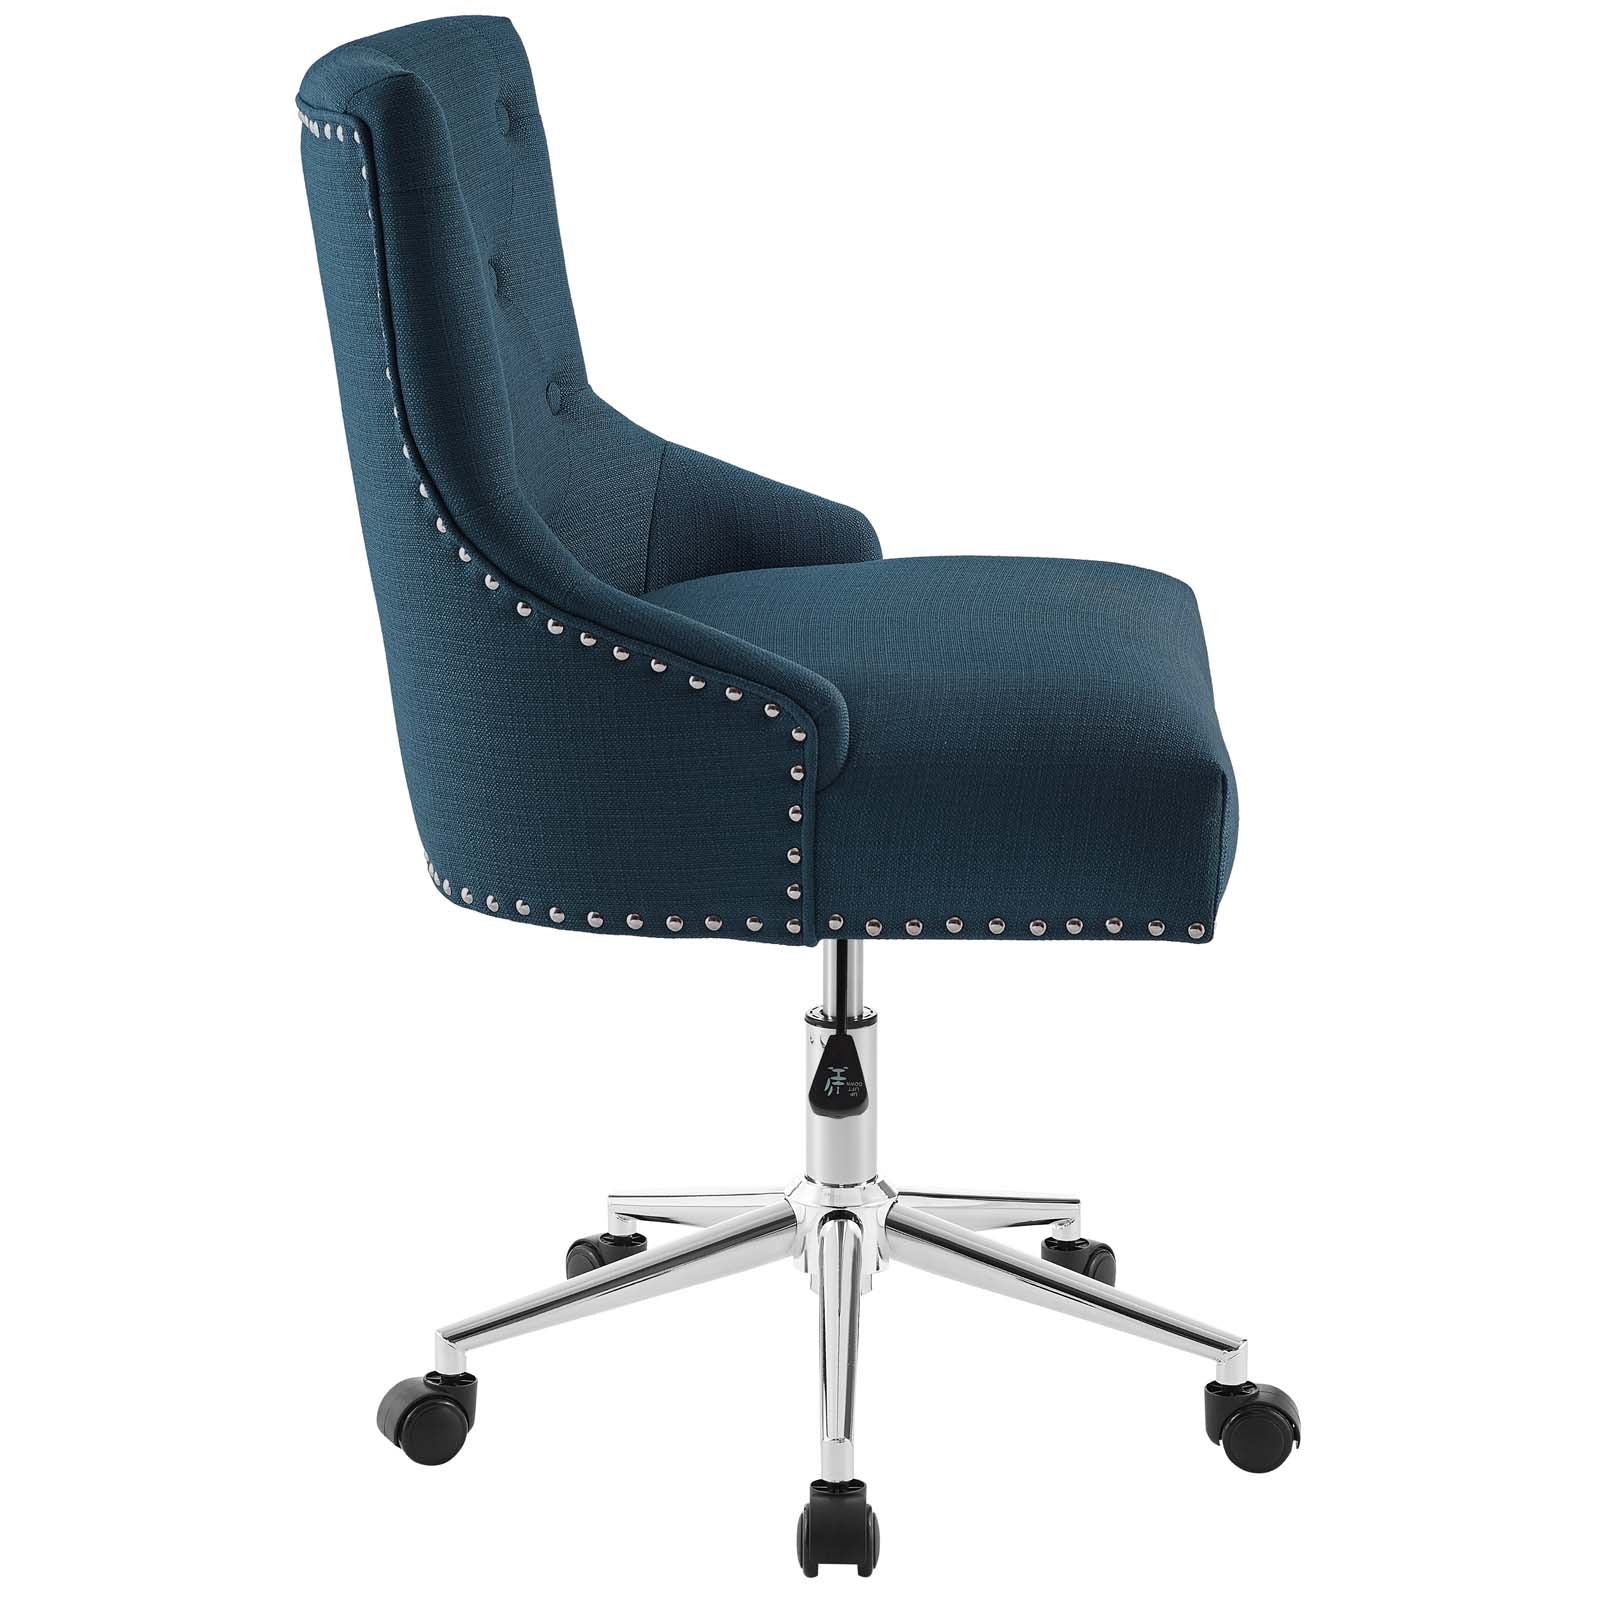 Regent Tufted Button Swivel Upholstered Fabric Office Chair - East Shore Modern Home Furnishings